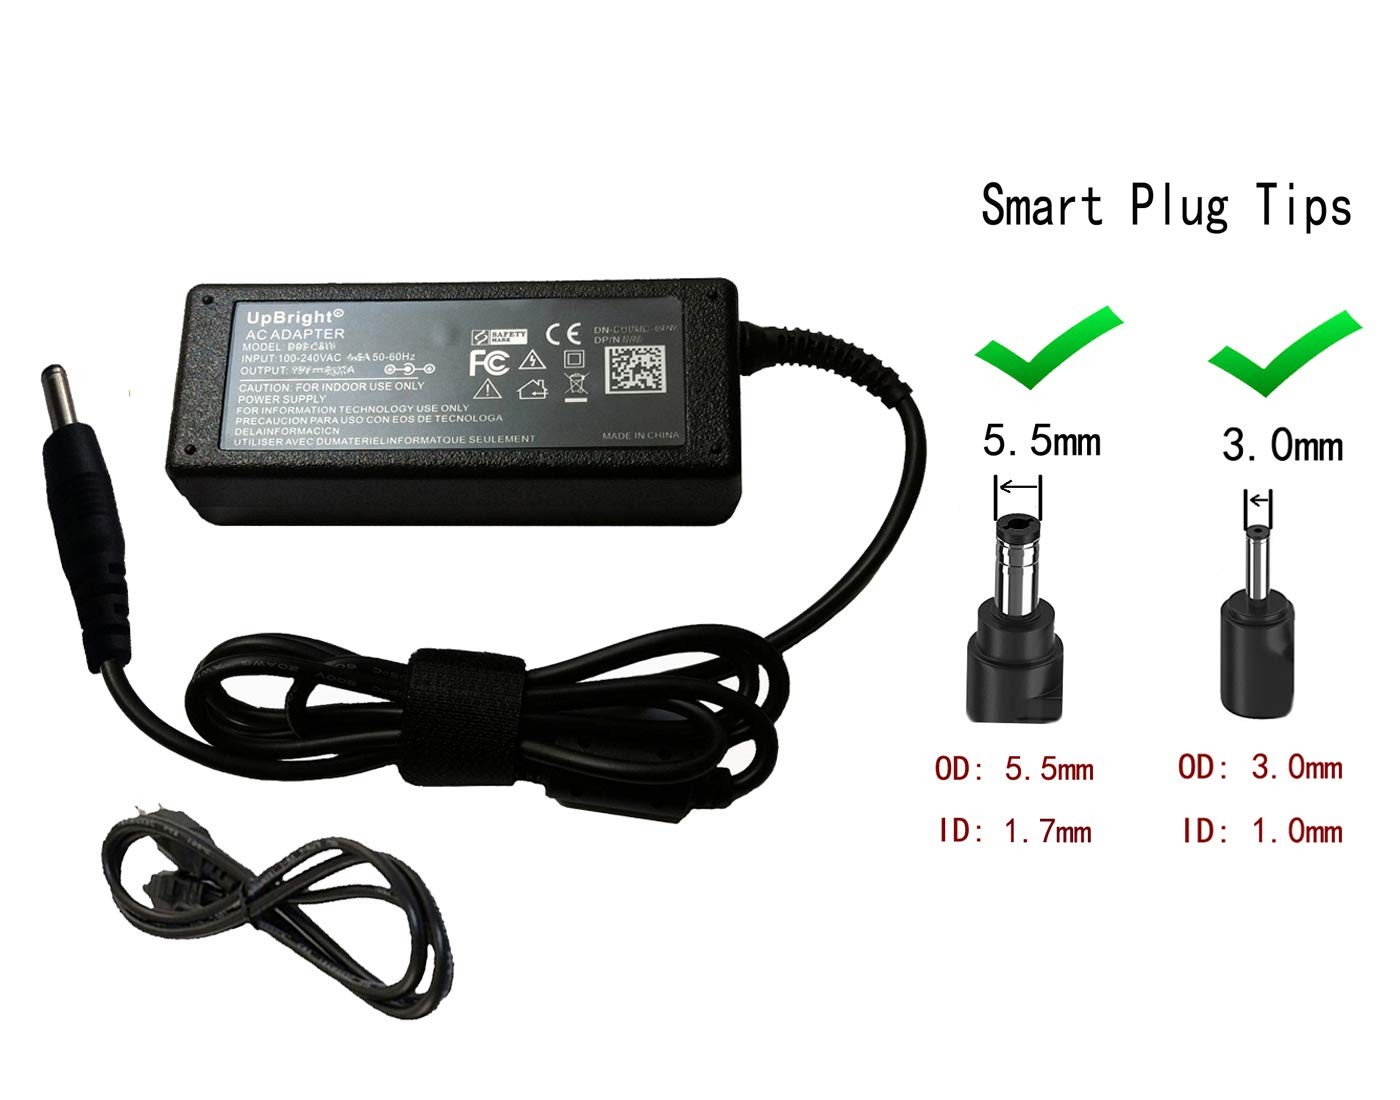 UpBright Global 19V 2 37A AC DC Adapter Replacement for Acer Aspire Liteon PA 1450 26 NSW N R PA Laptop Notebook PC 19VDC 2370mA 19 0V